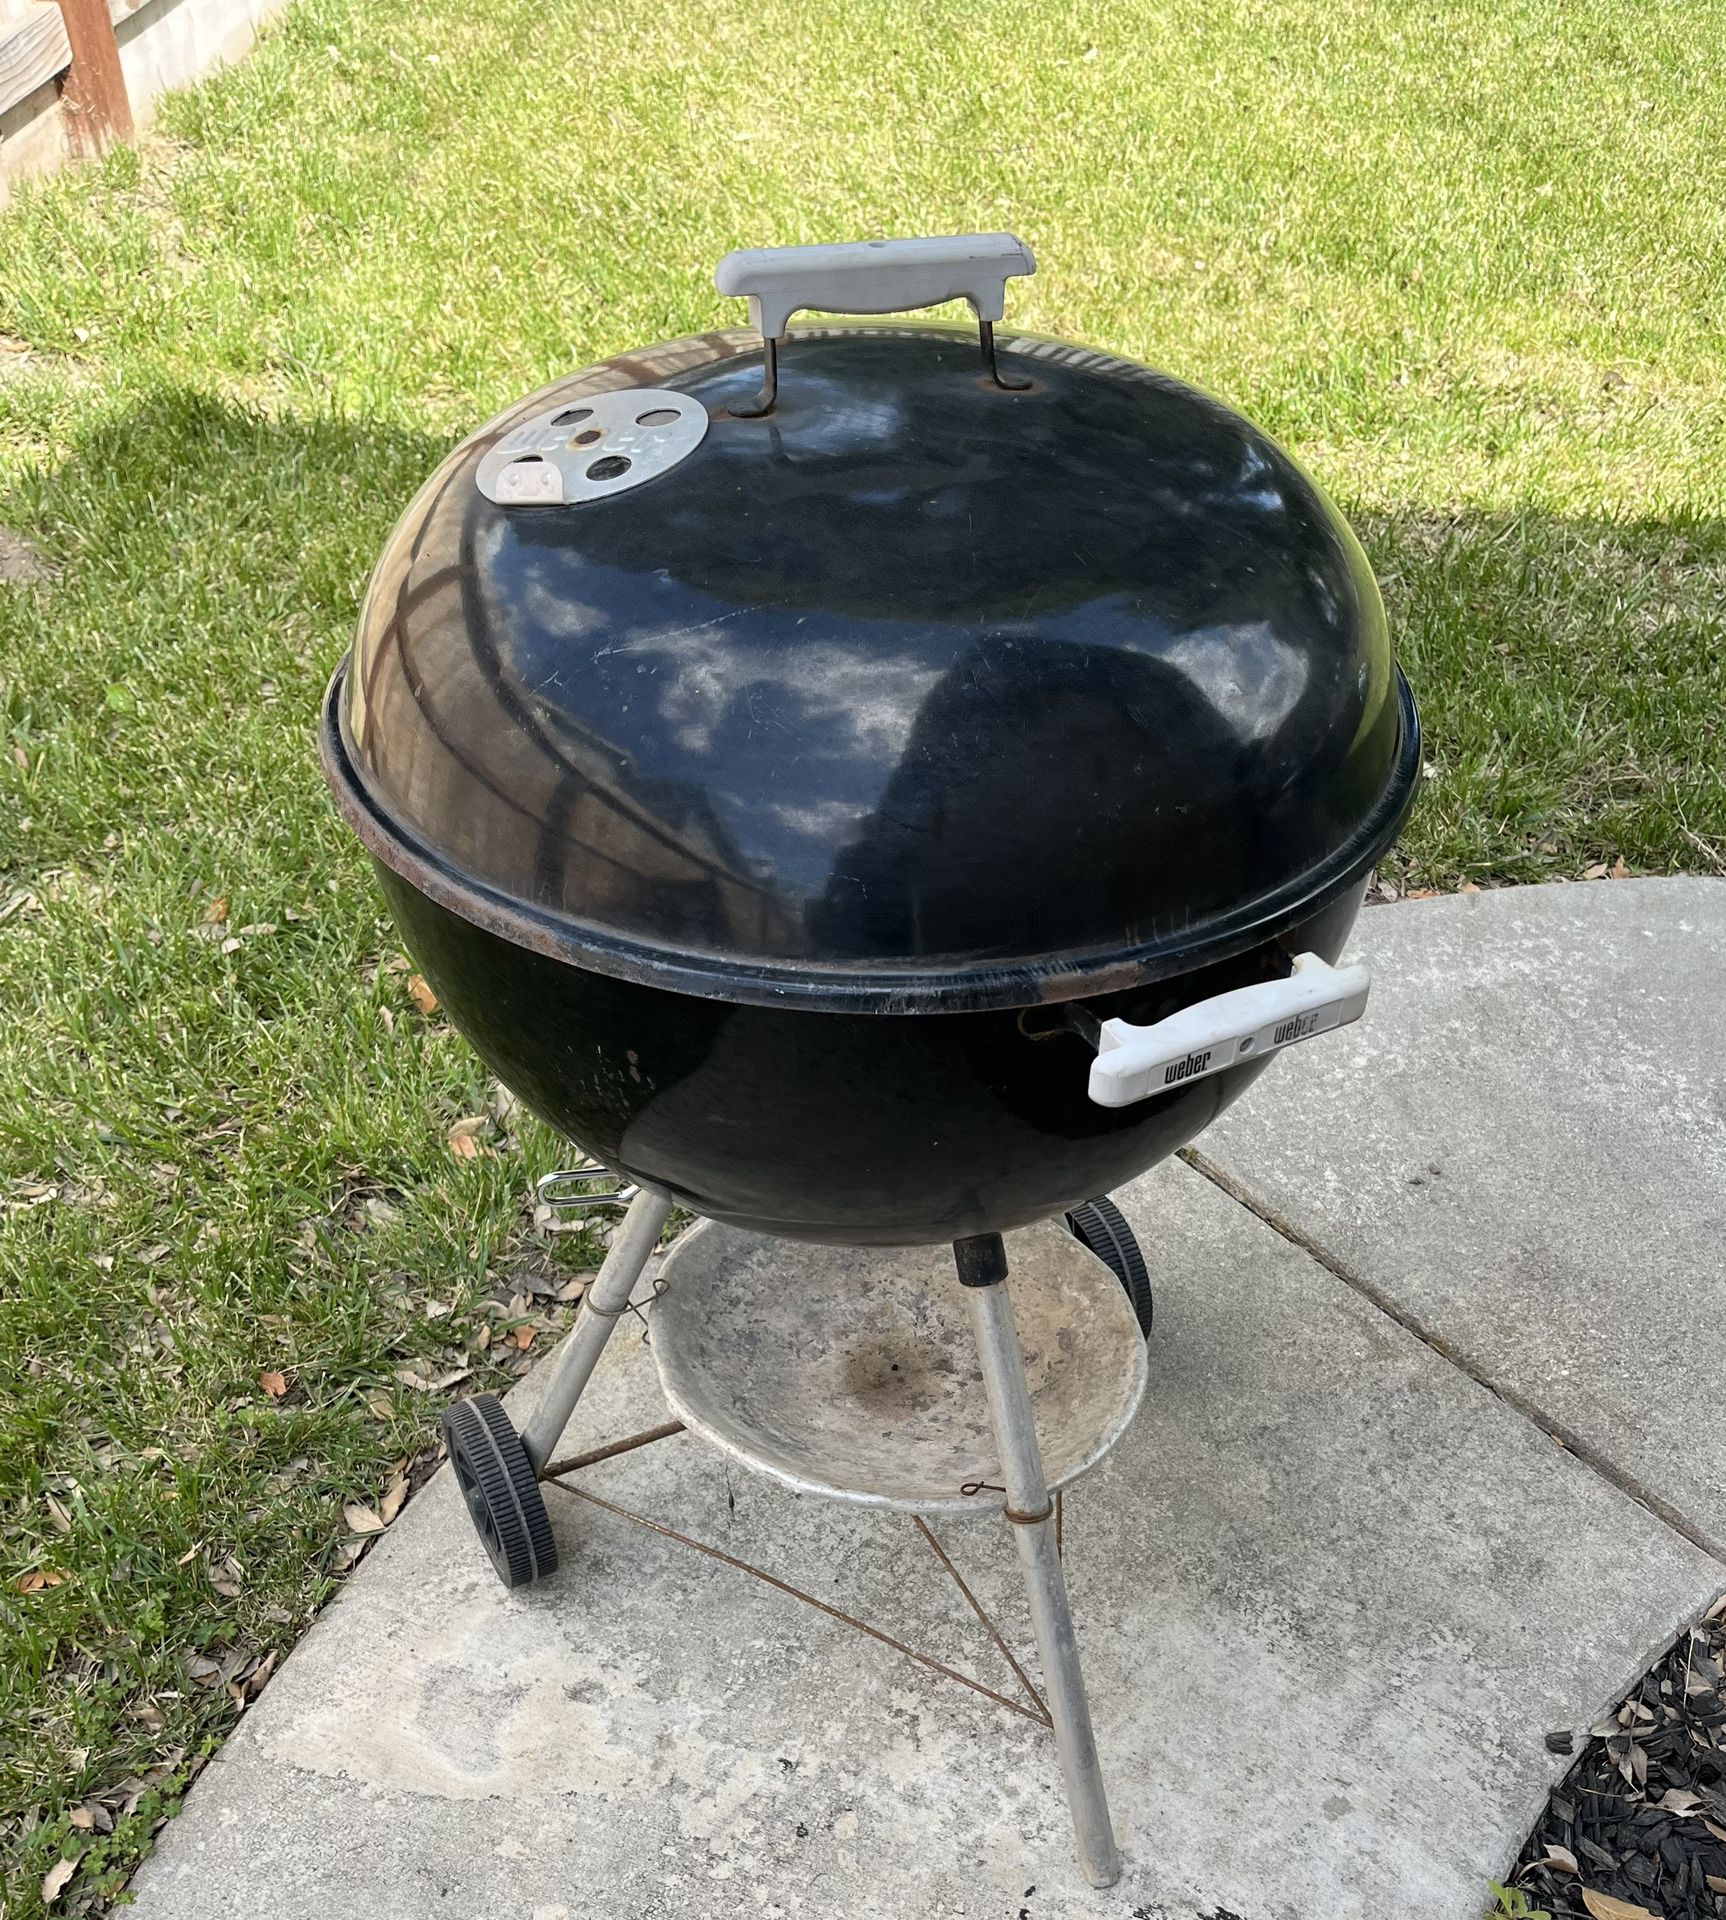 Weber 22in Charcoal Grill BBQ 22 Inch